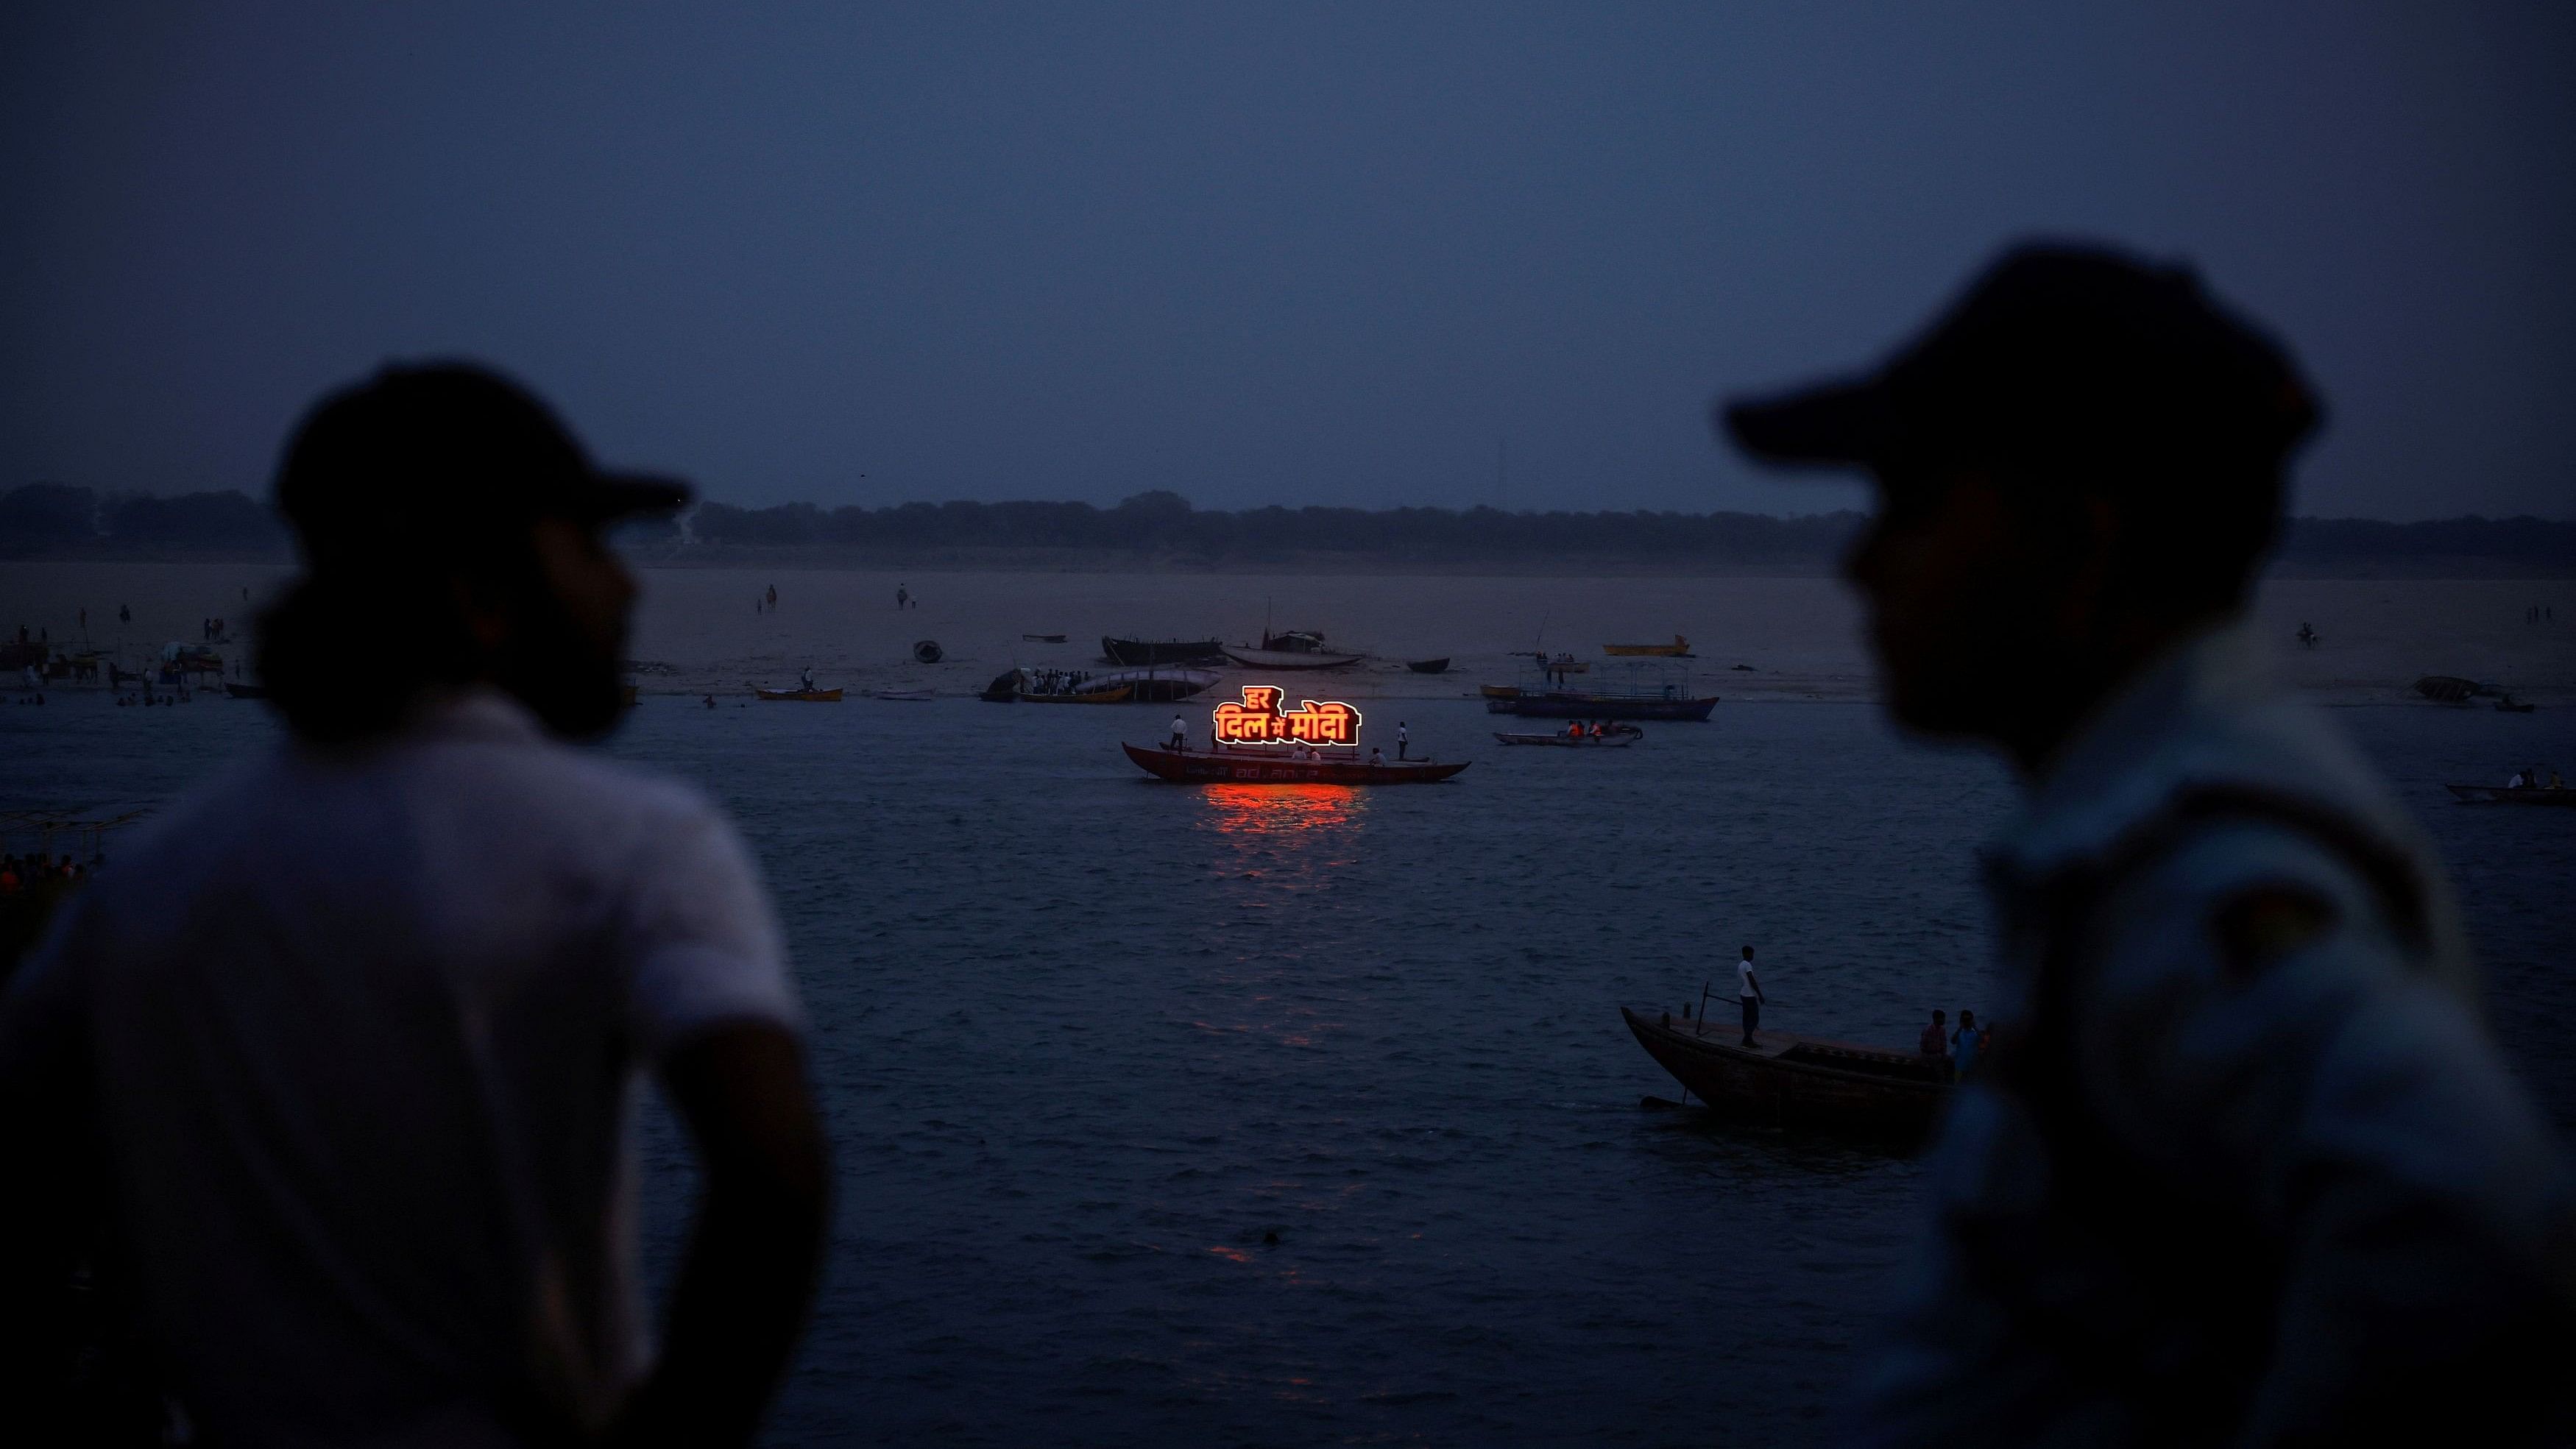 <div class="paragraphs"><p>A boat carries an illuminated message in support of Indian PM Modi on the river Ganges at Varanasi</p></div>